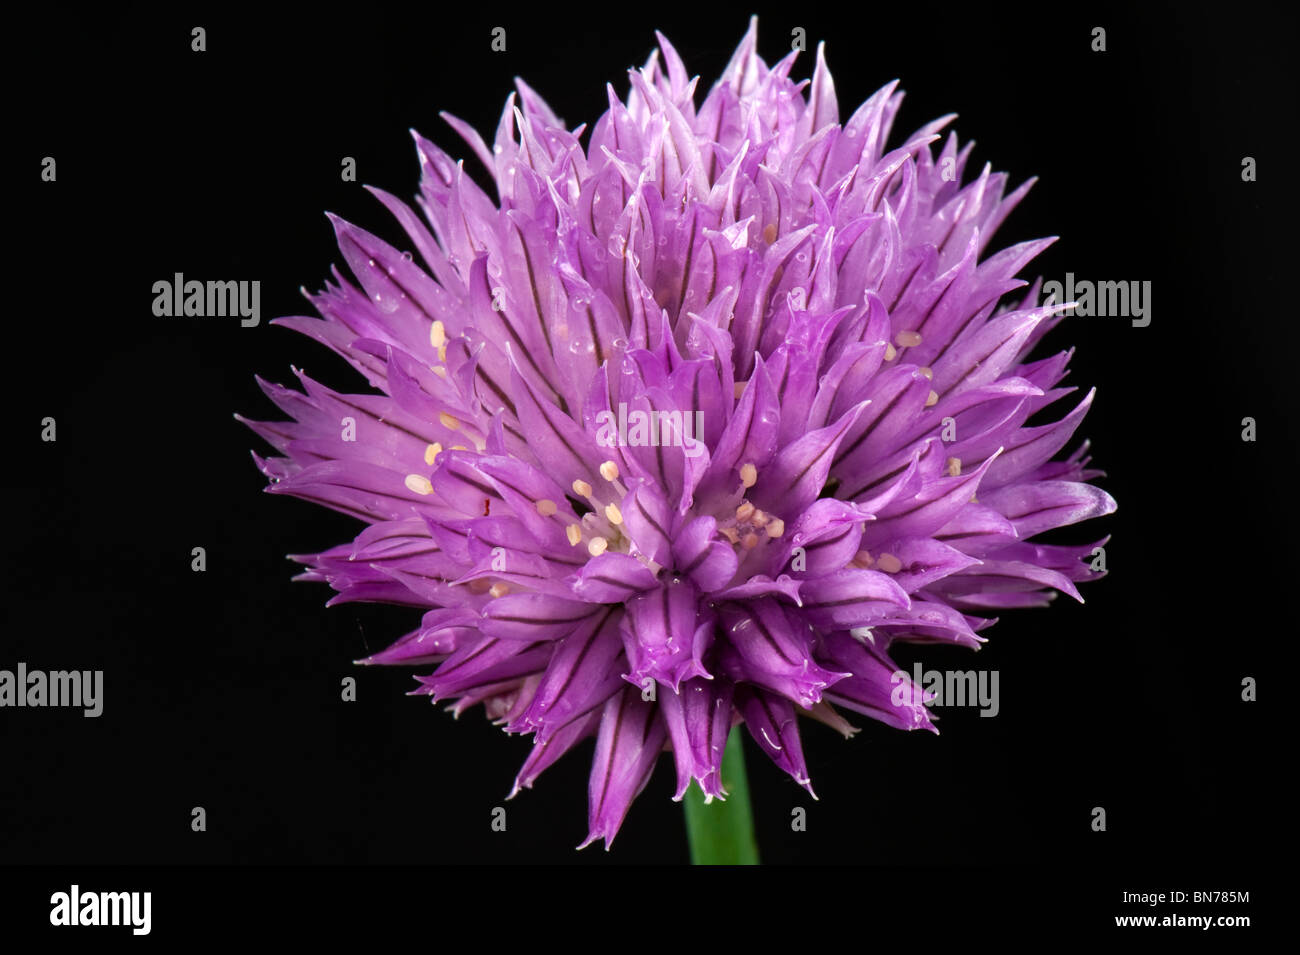 Flower on a chives plant Stock Photo